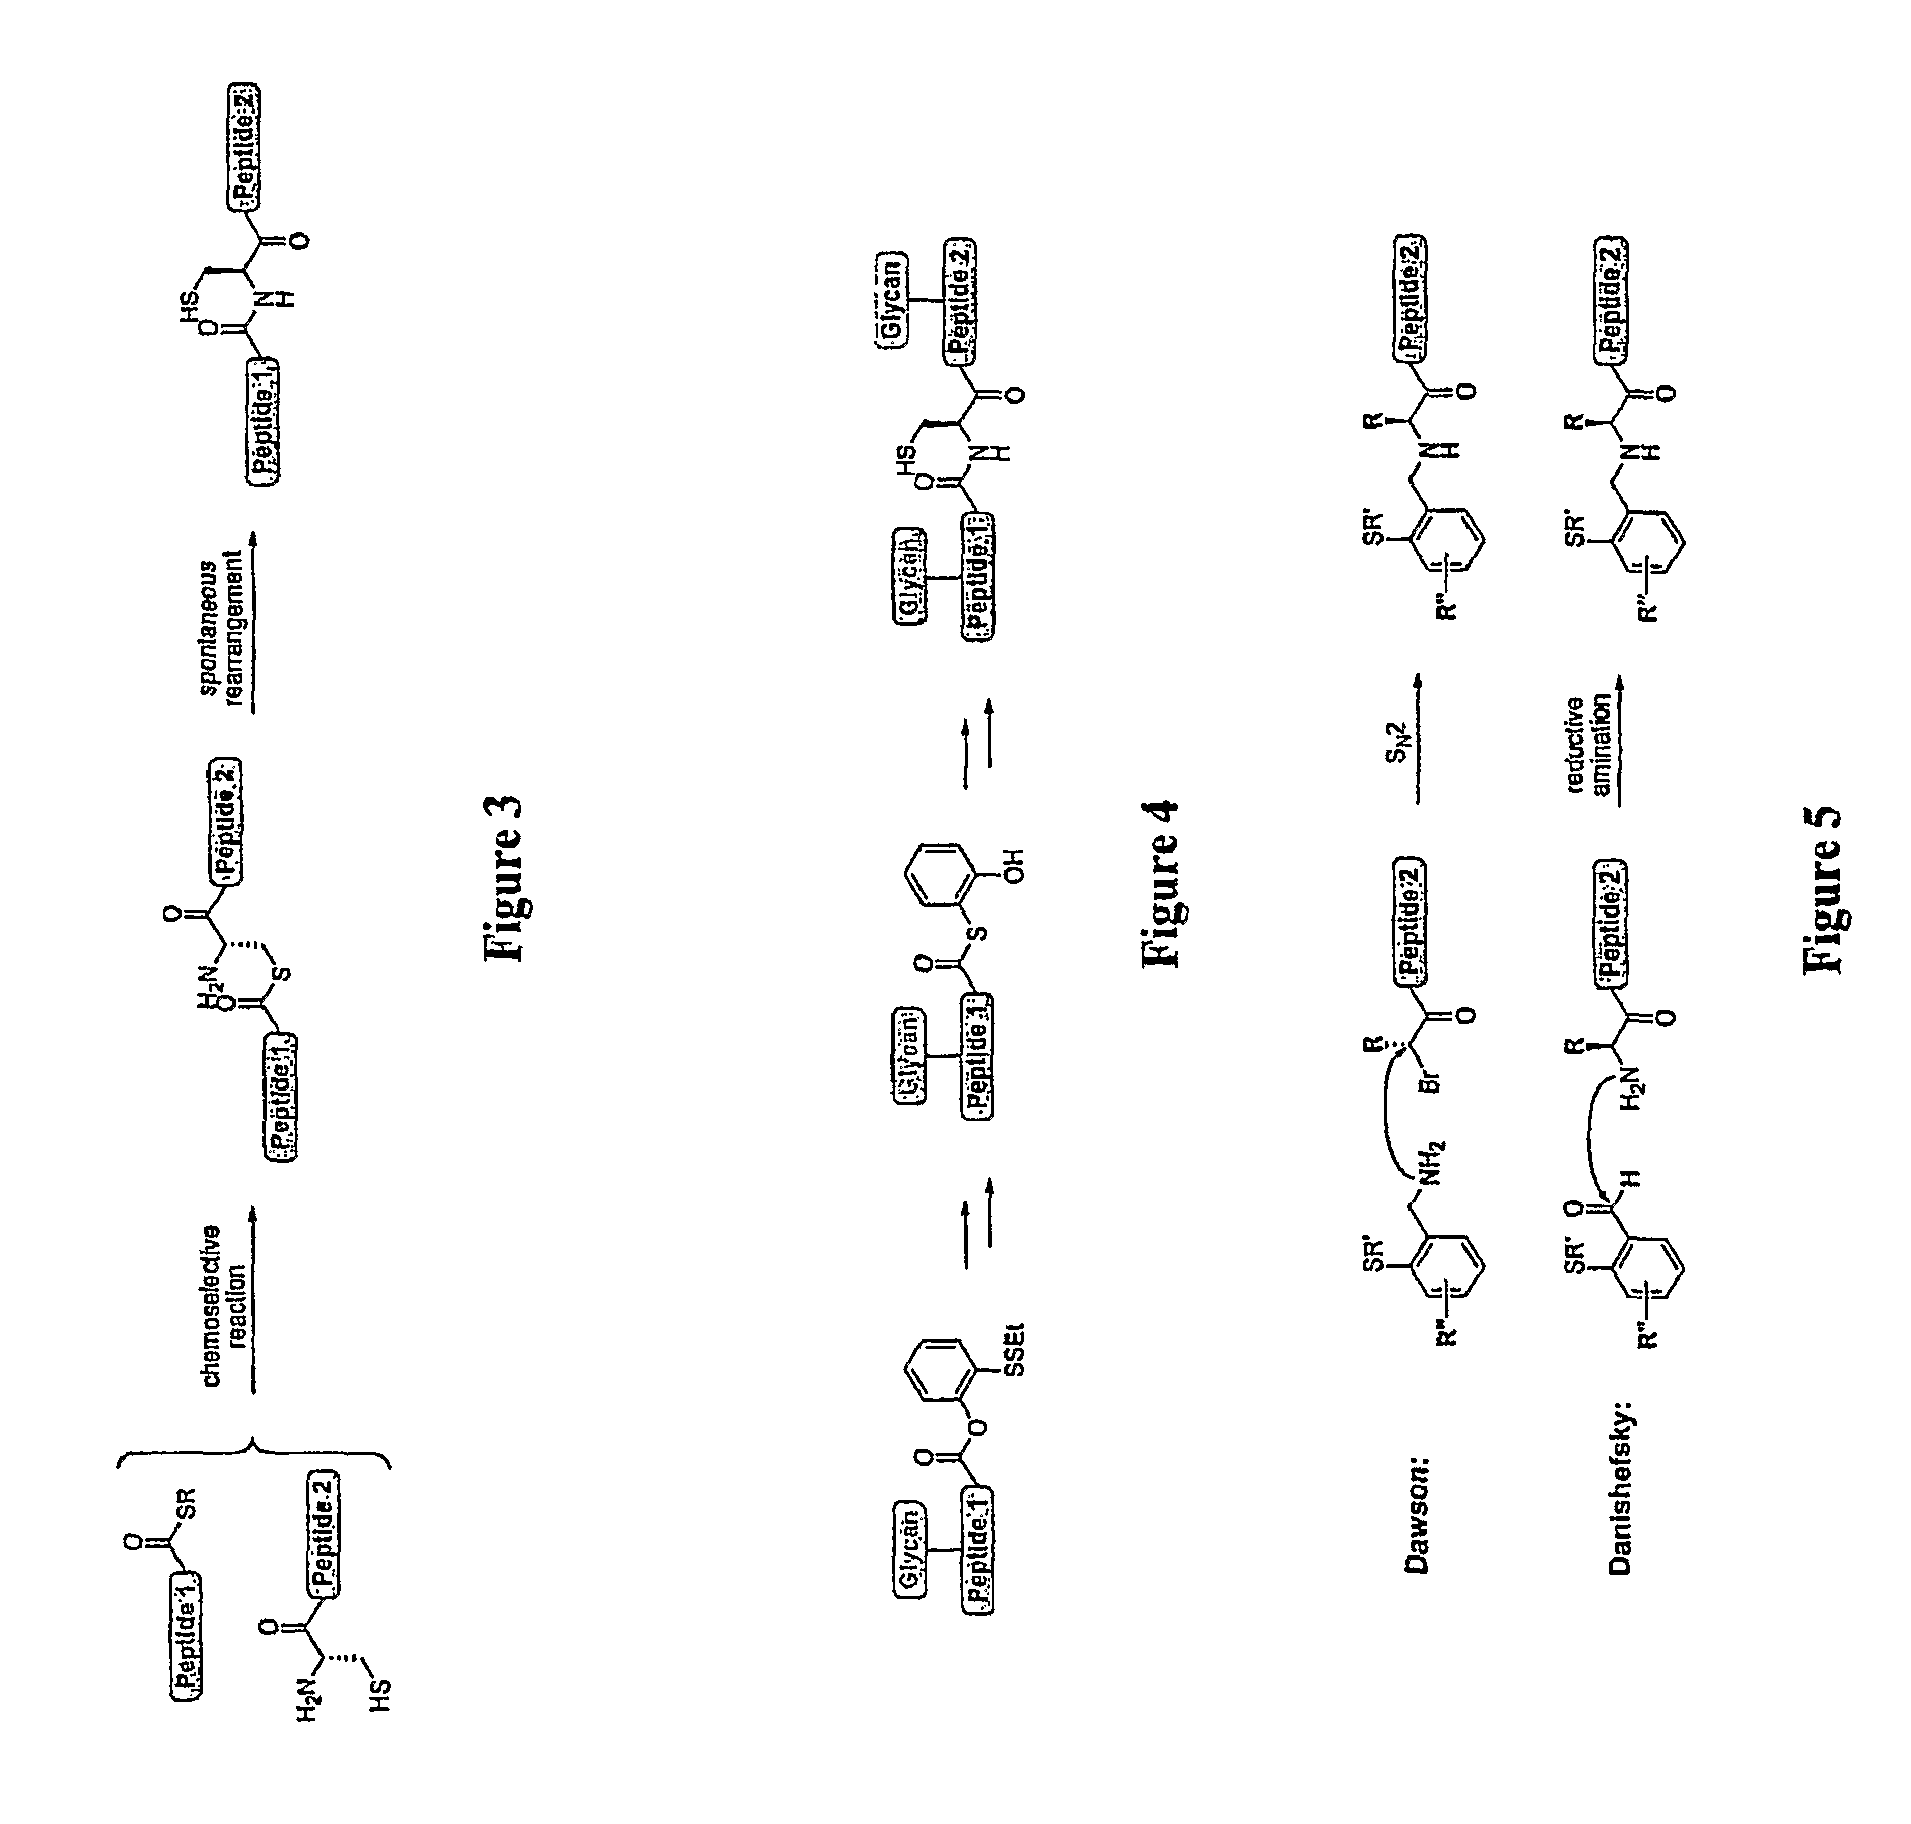 Compositions comprising homogeneously glycosylated erythropoietin